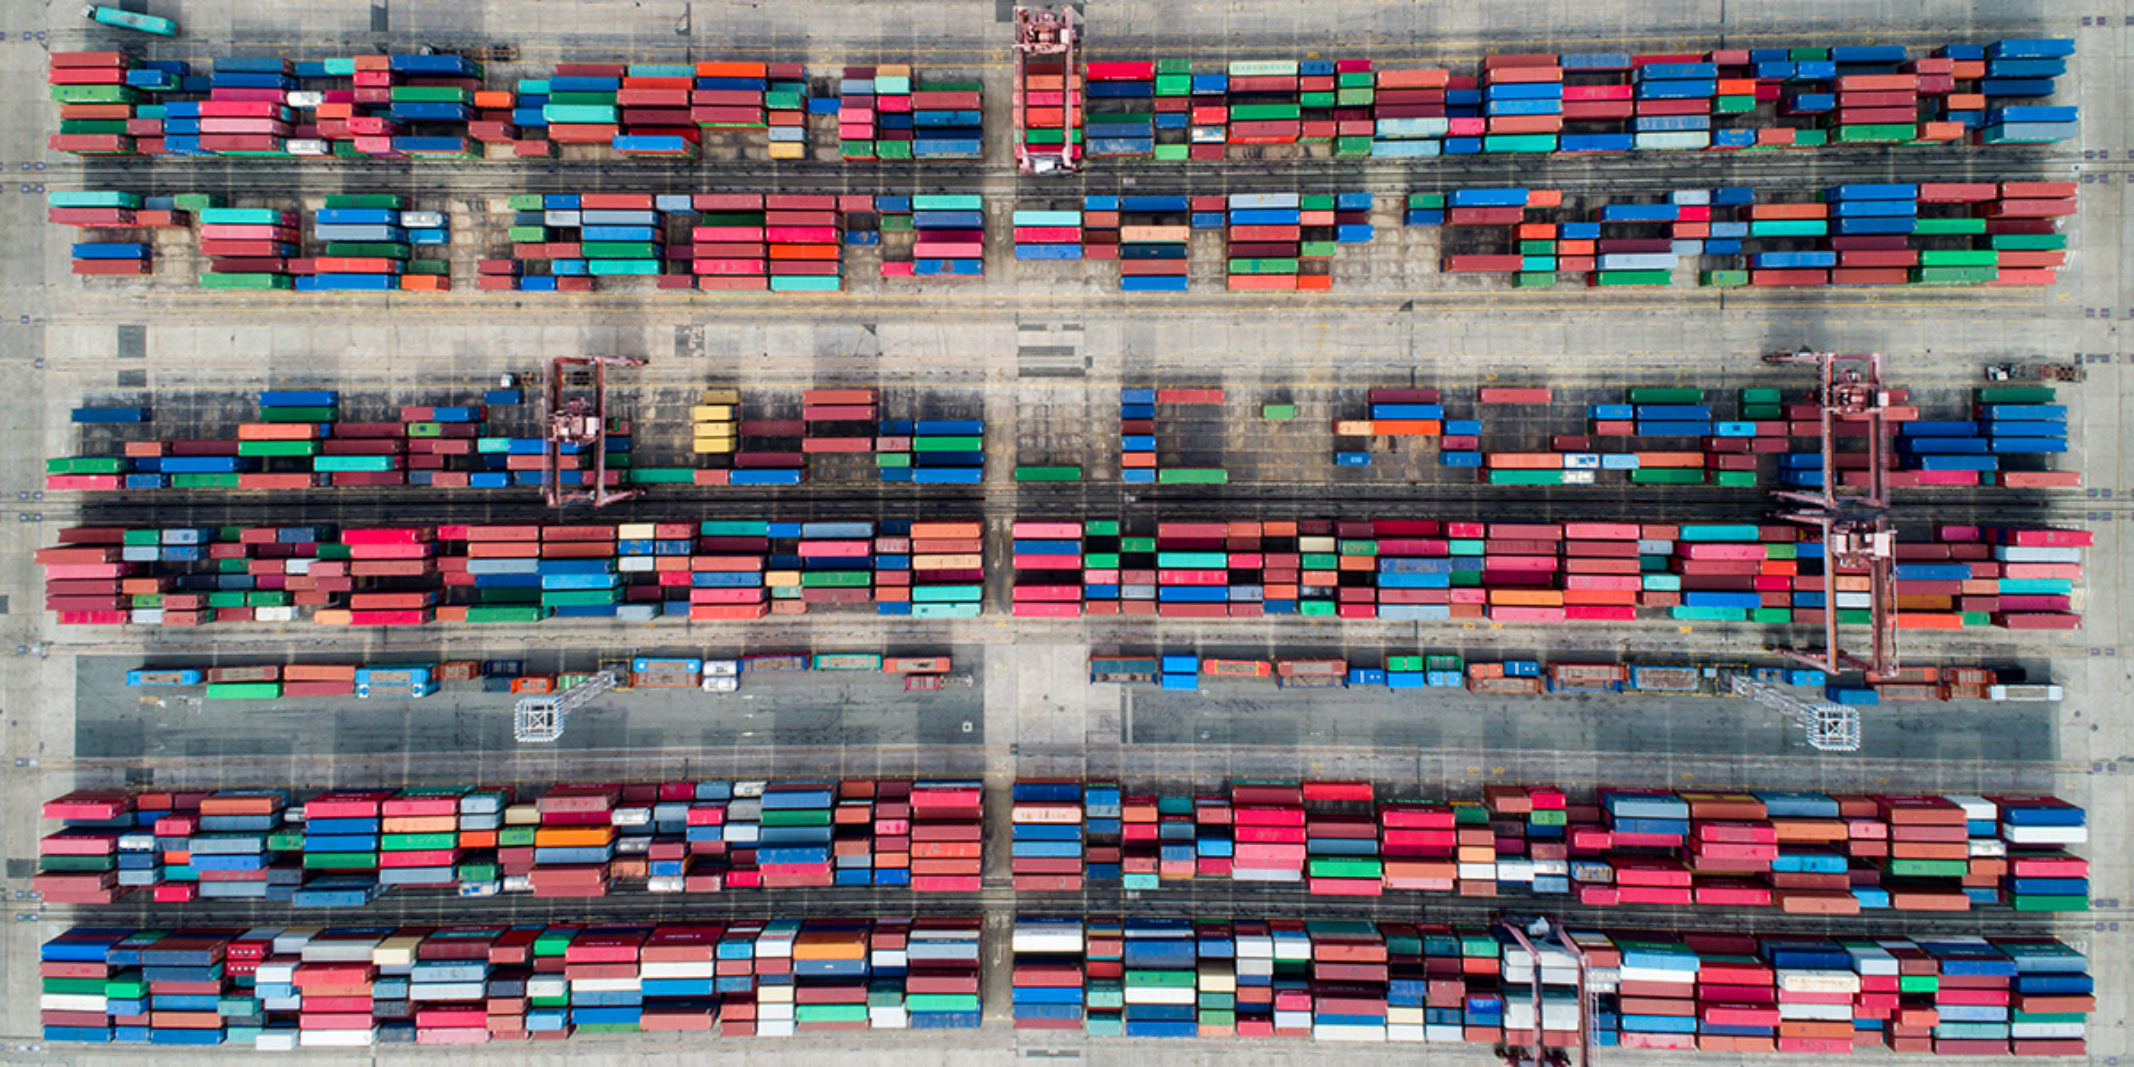 Aerial view of a shipping container yard